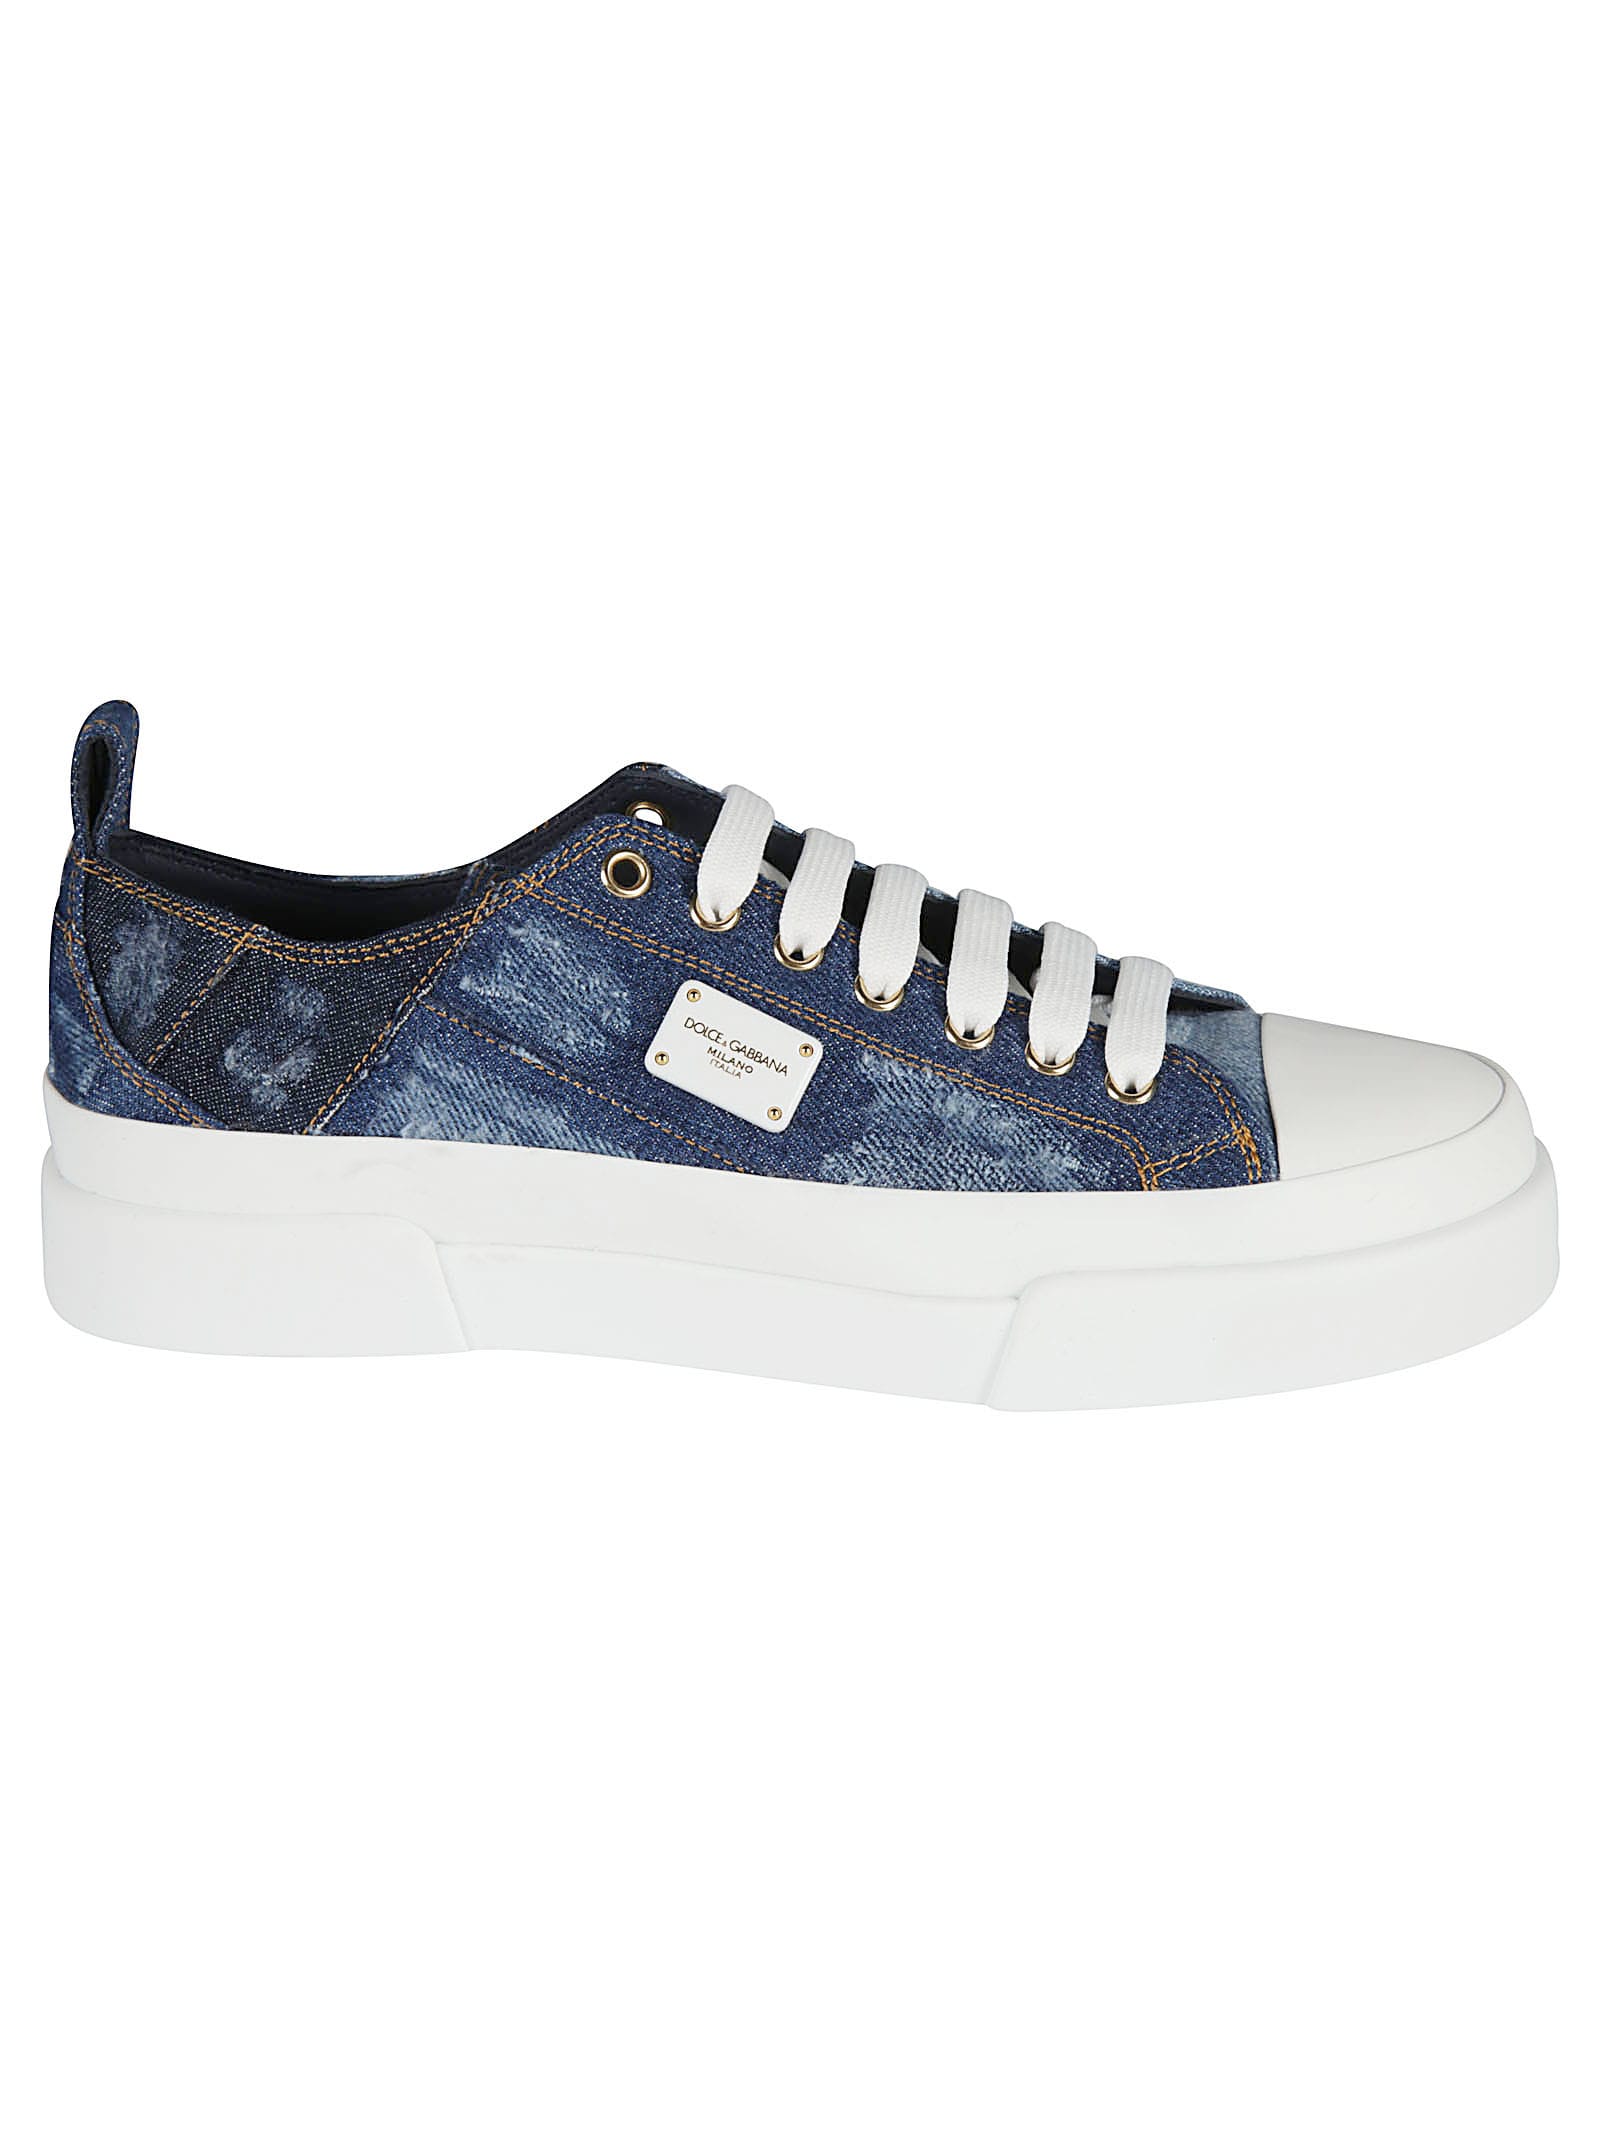 Buy Dolce & Gabbana Logo Plaque Denim Sneakers online, shop Dolce & Gabbana shoes with free shipping